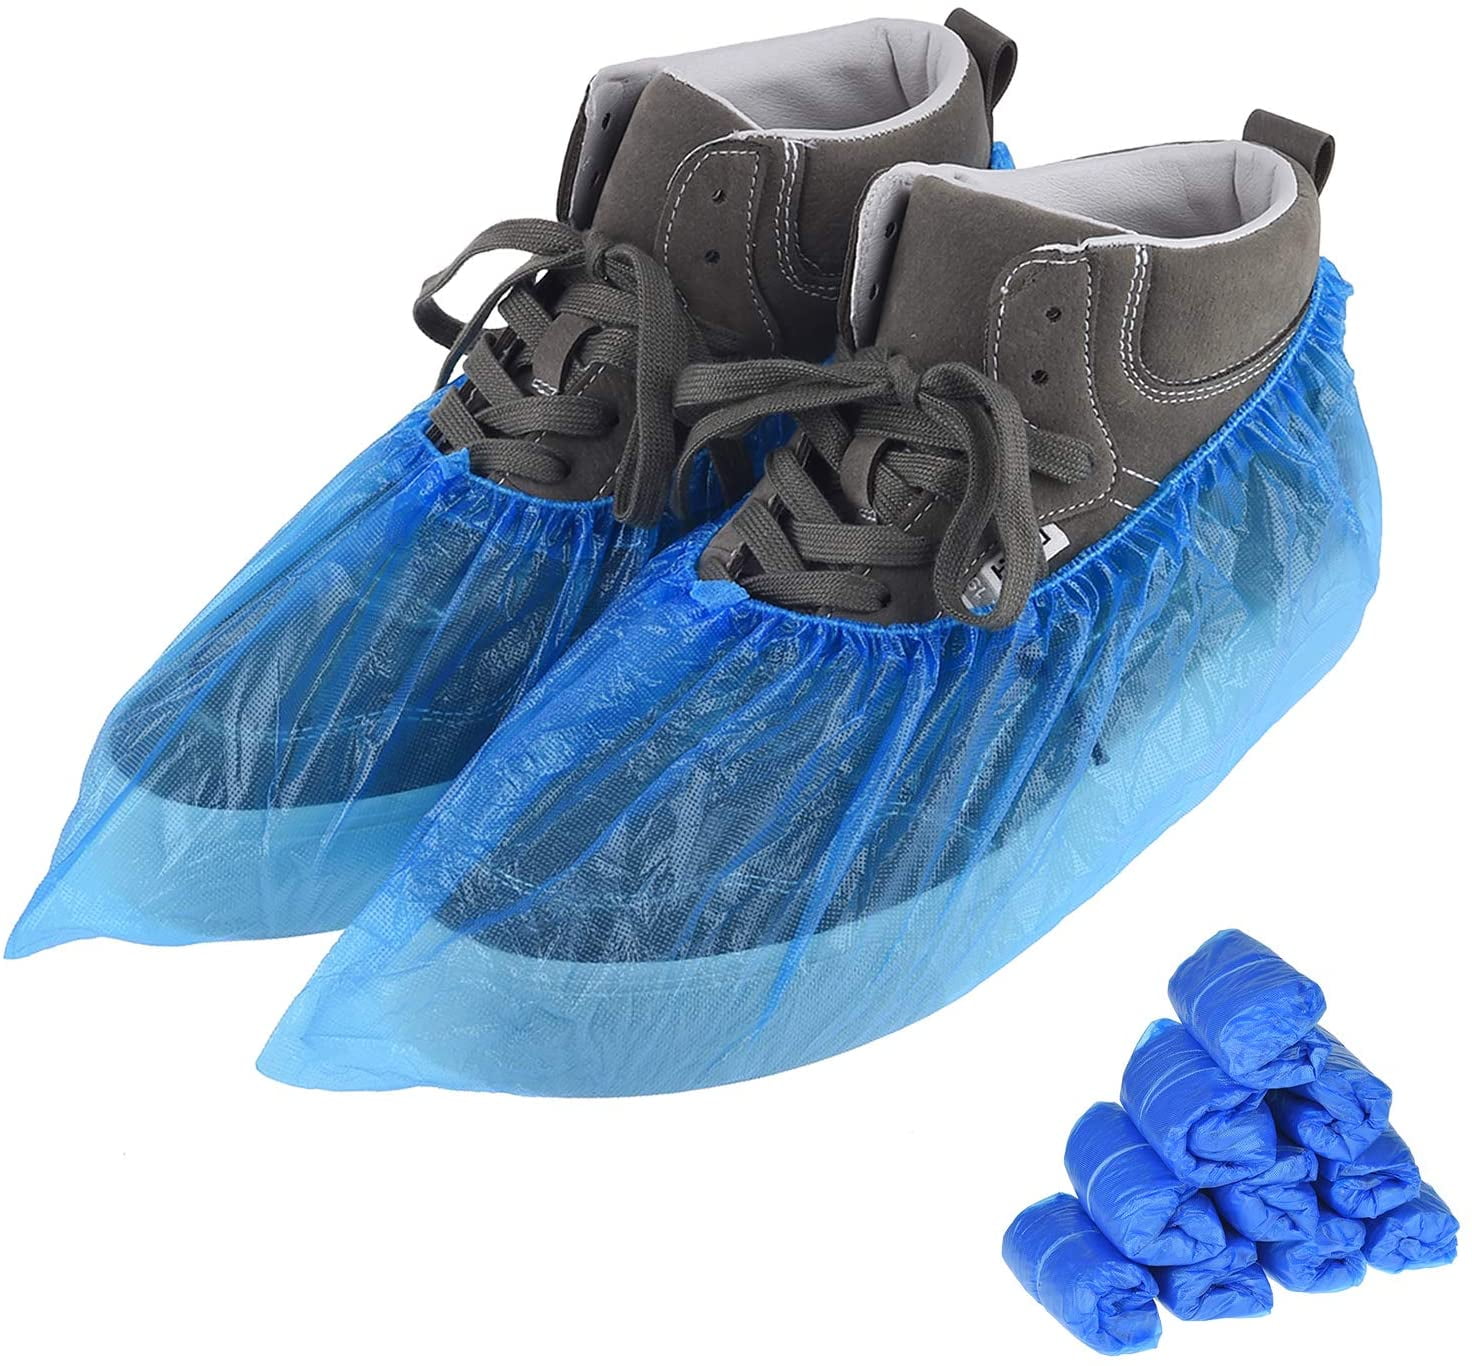 Disposable Overshoes Cleaning Boot Plastic Waterproof Shoe Covers Protectors 